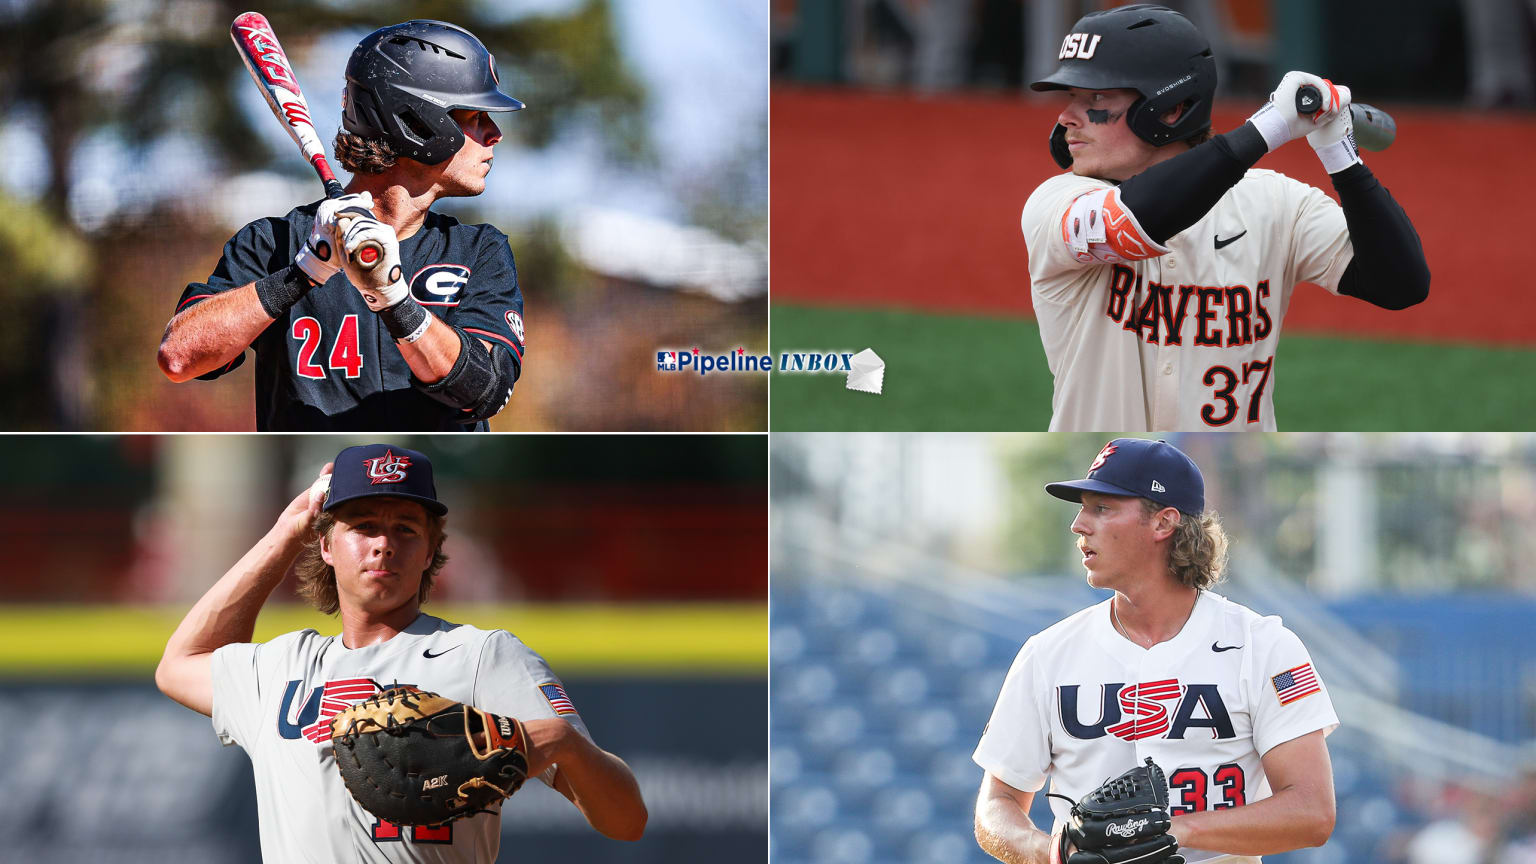 MLB Pipeline Inbox looks at the top Draft prospects